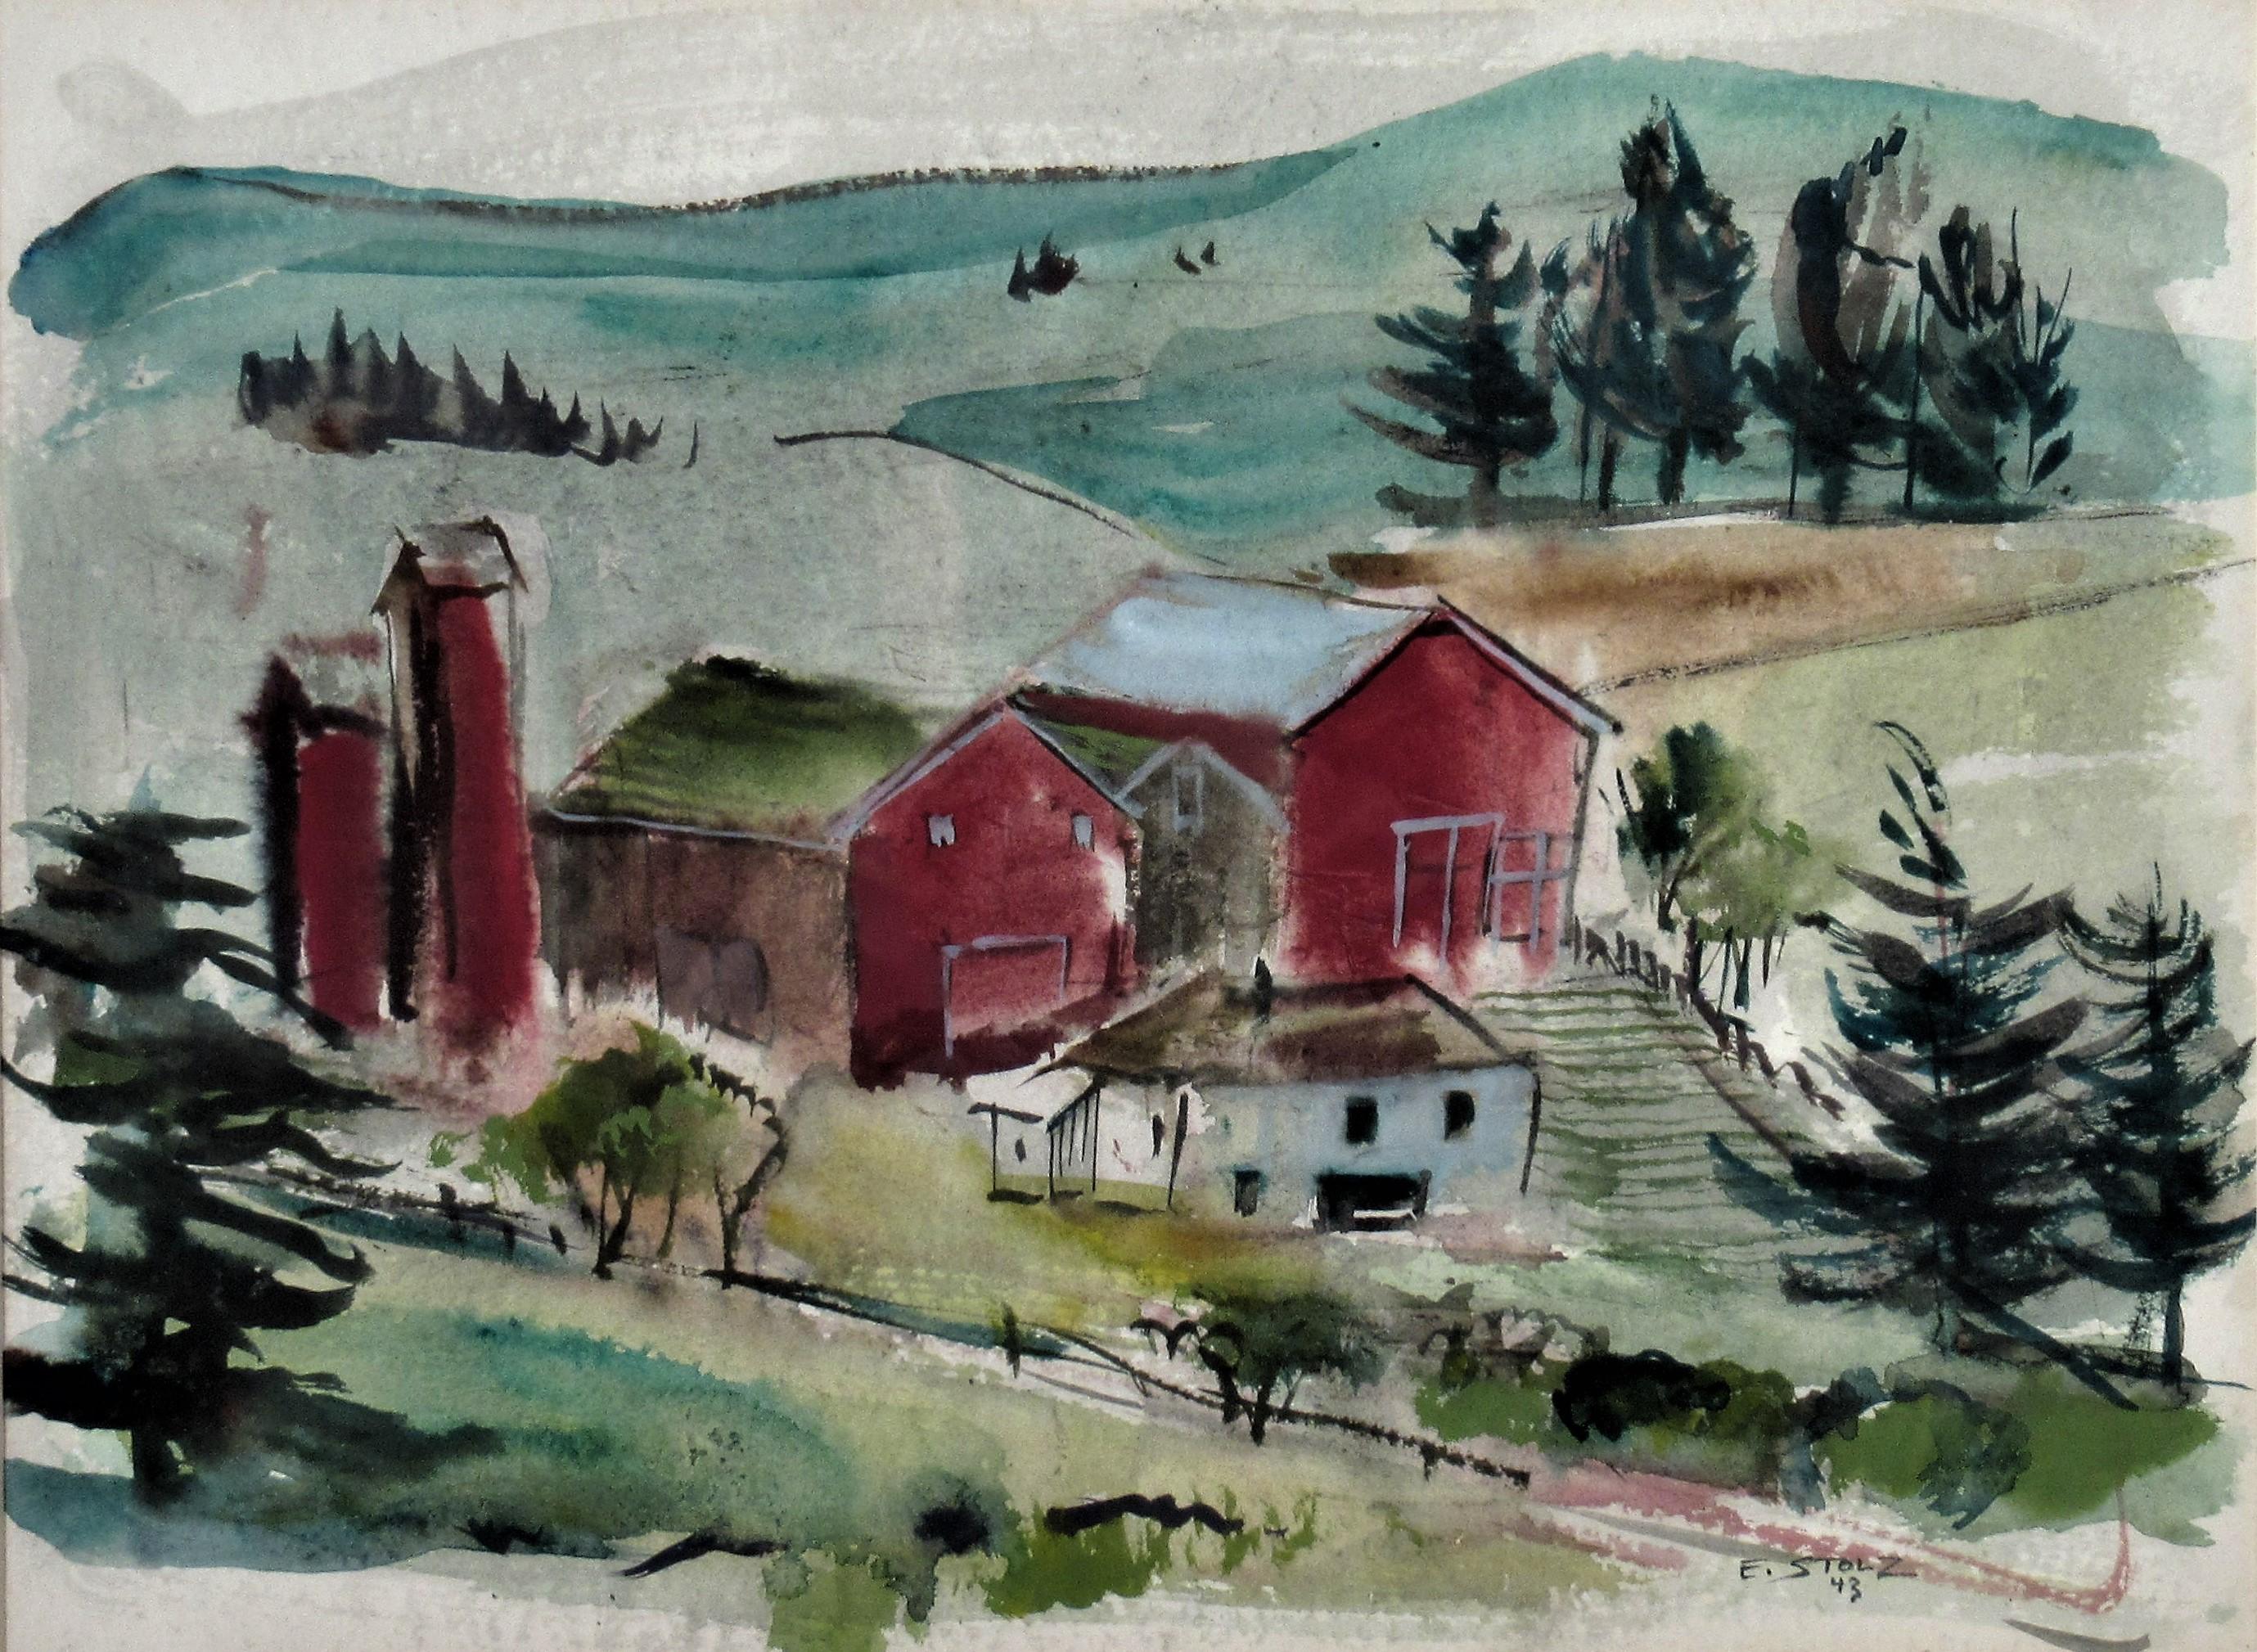 California Landscape with Farm - Art by Hernst Stolz